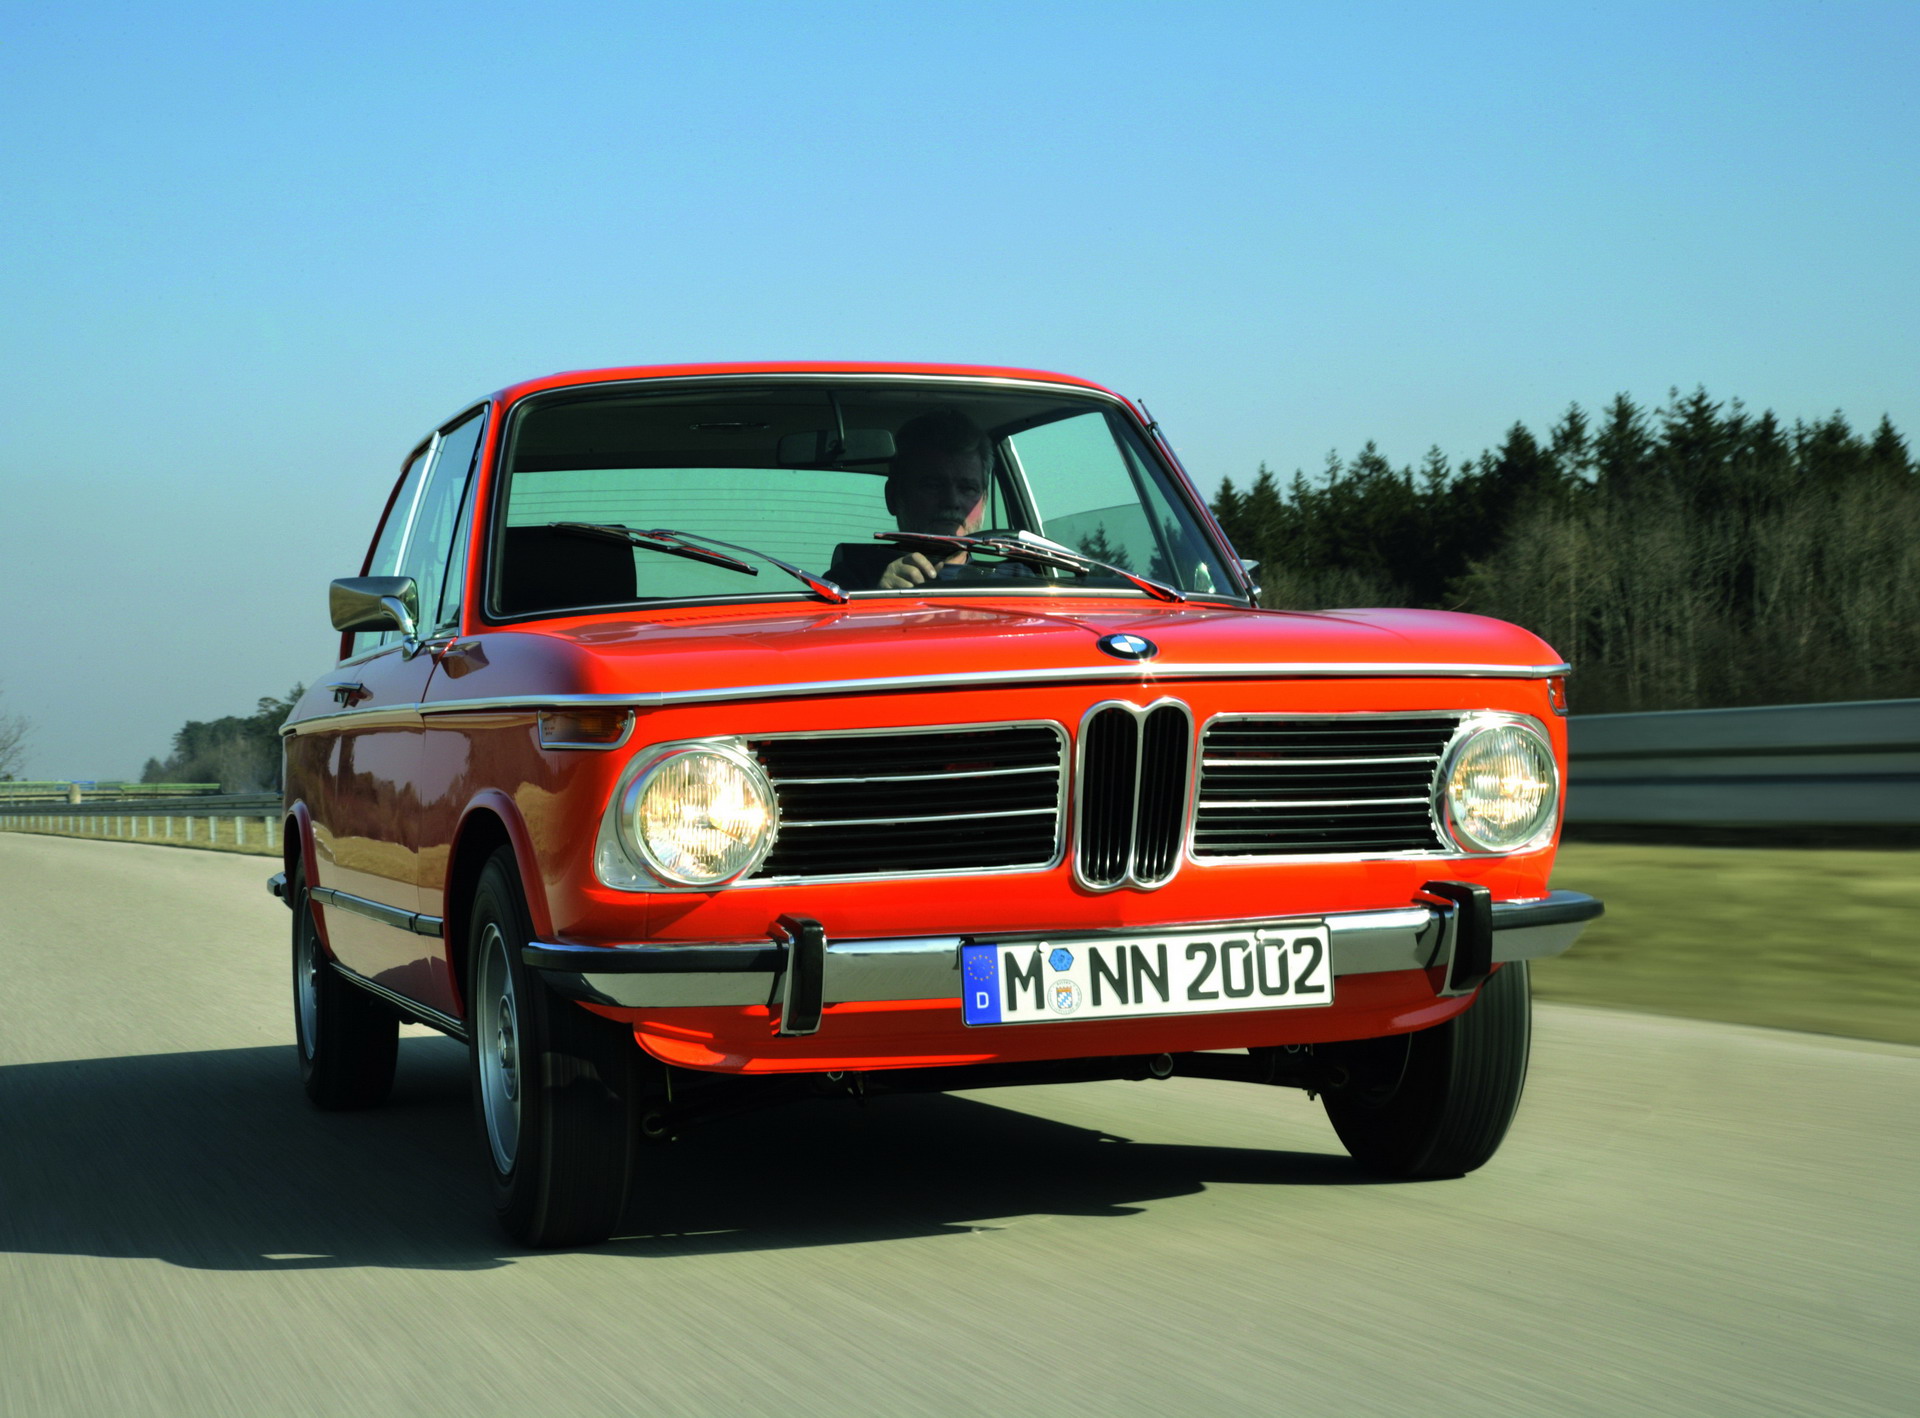 The BMW 2002 13